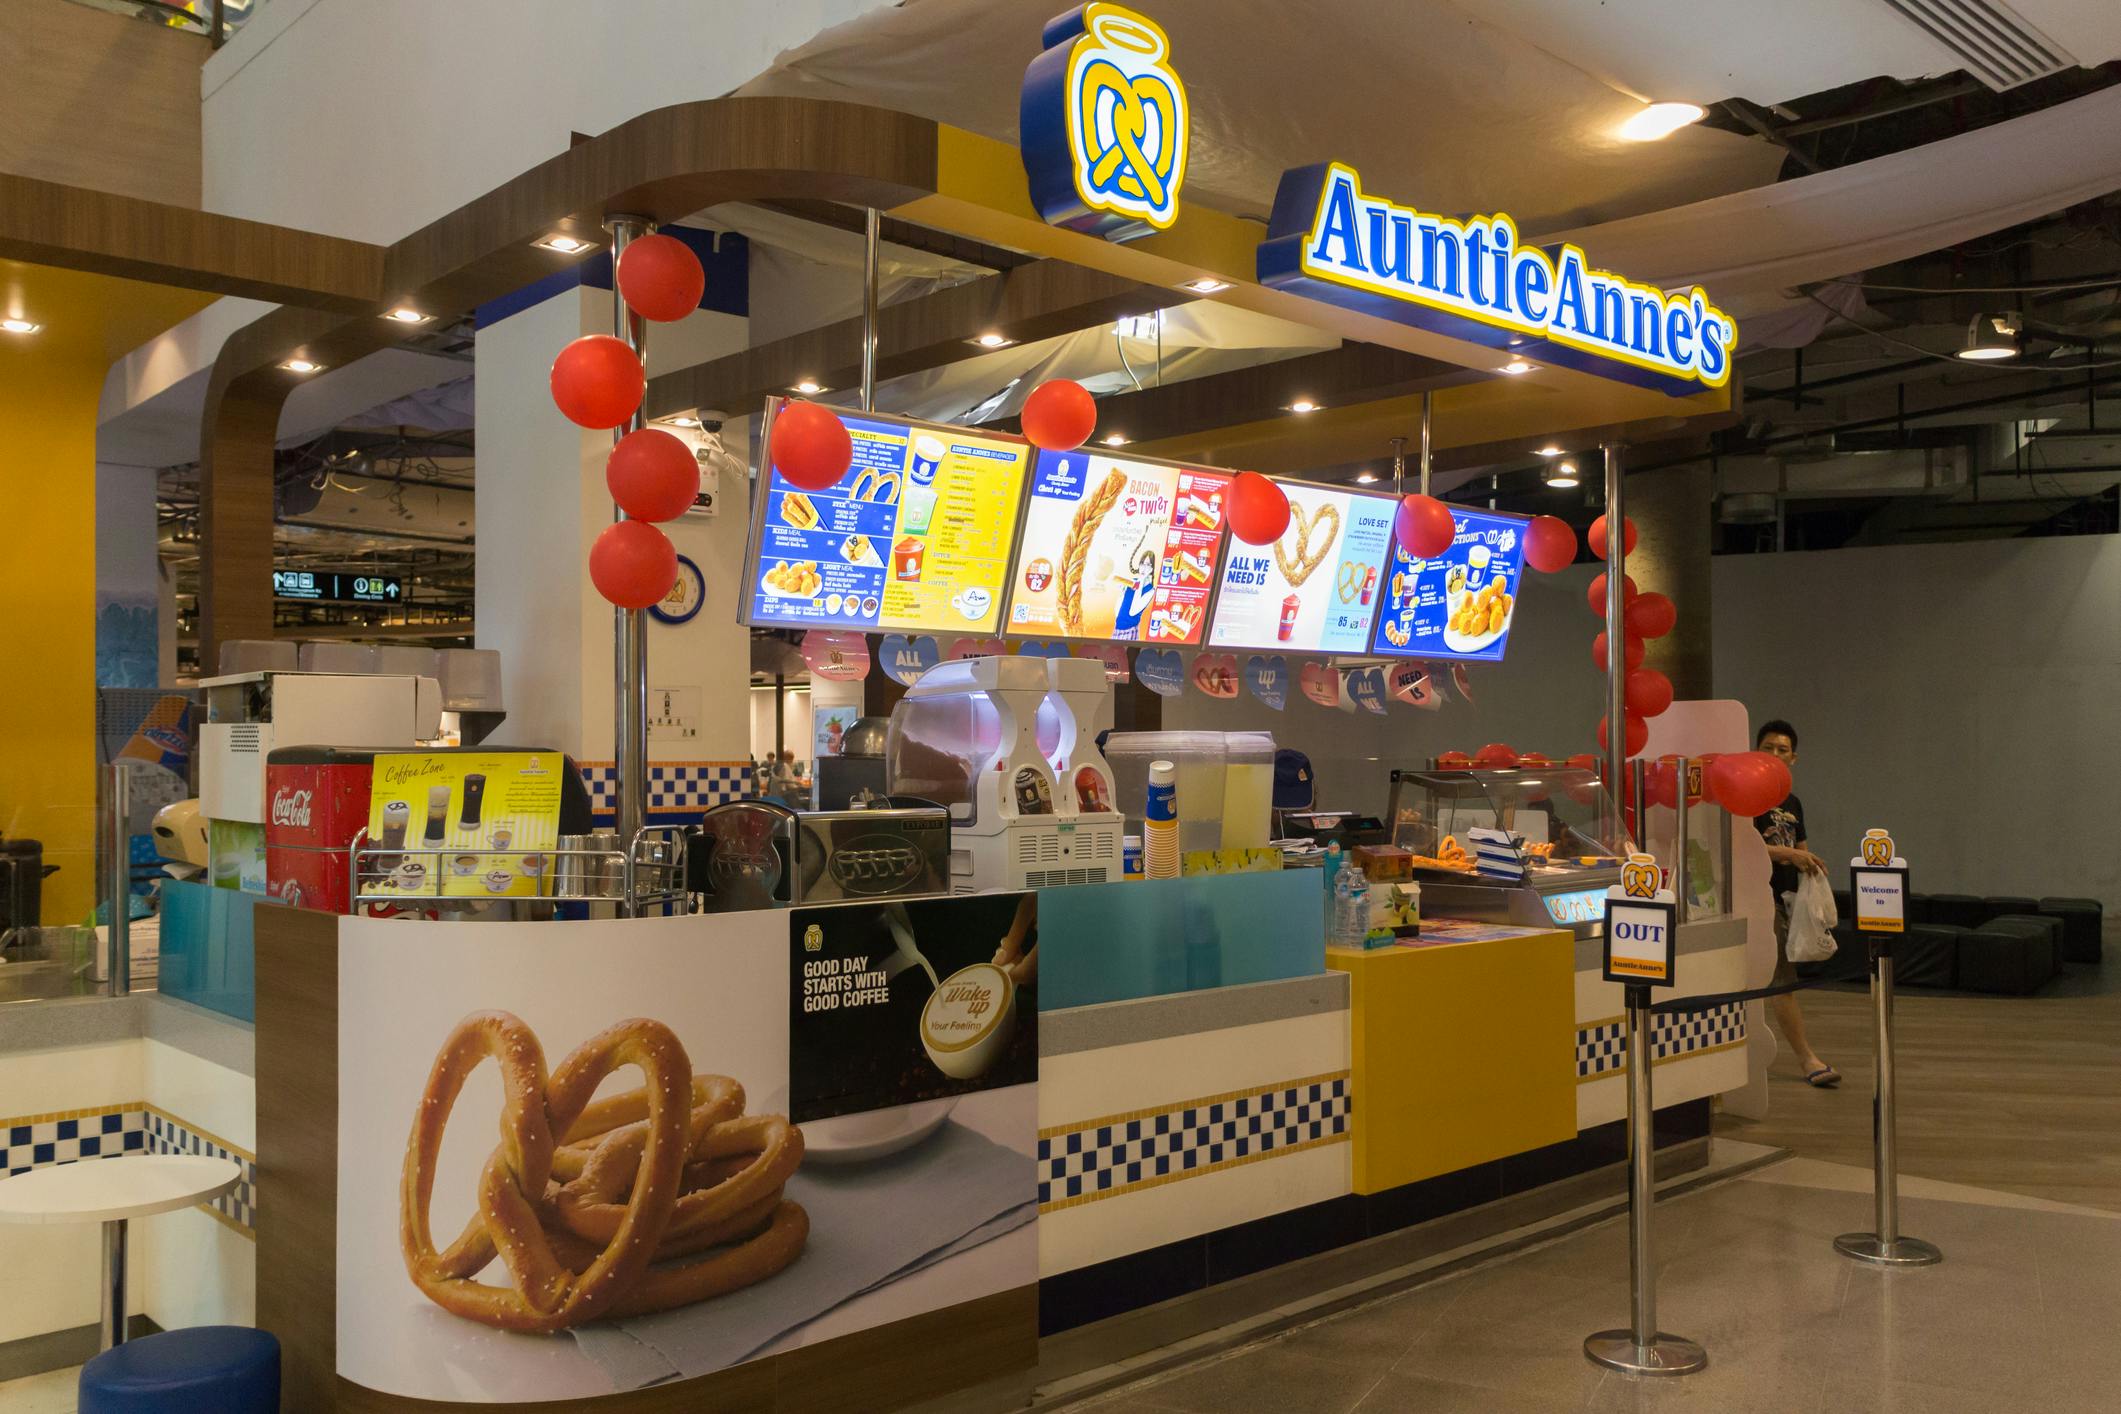 Auntie Annes storefront in a mall, where you can get free 4th of July food